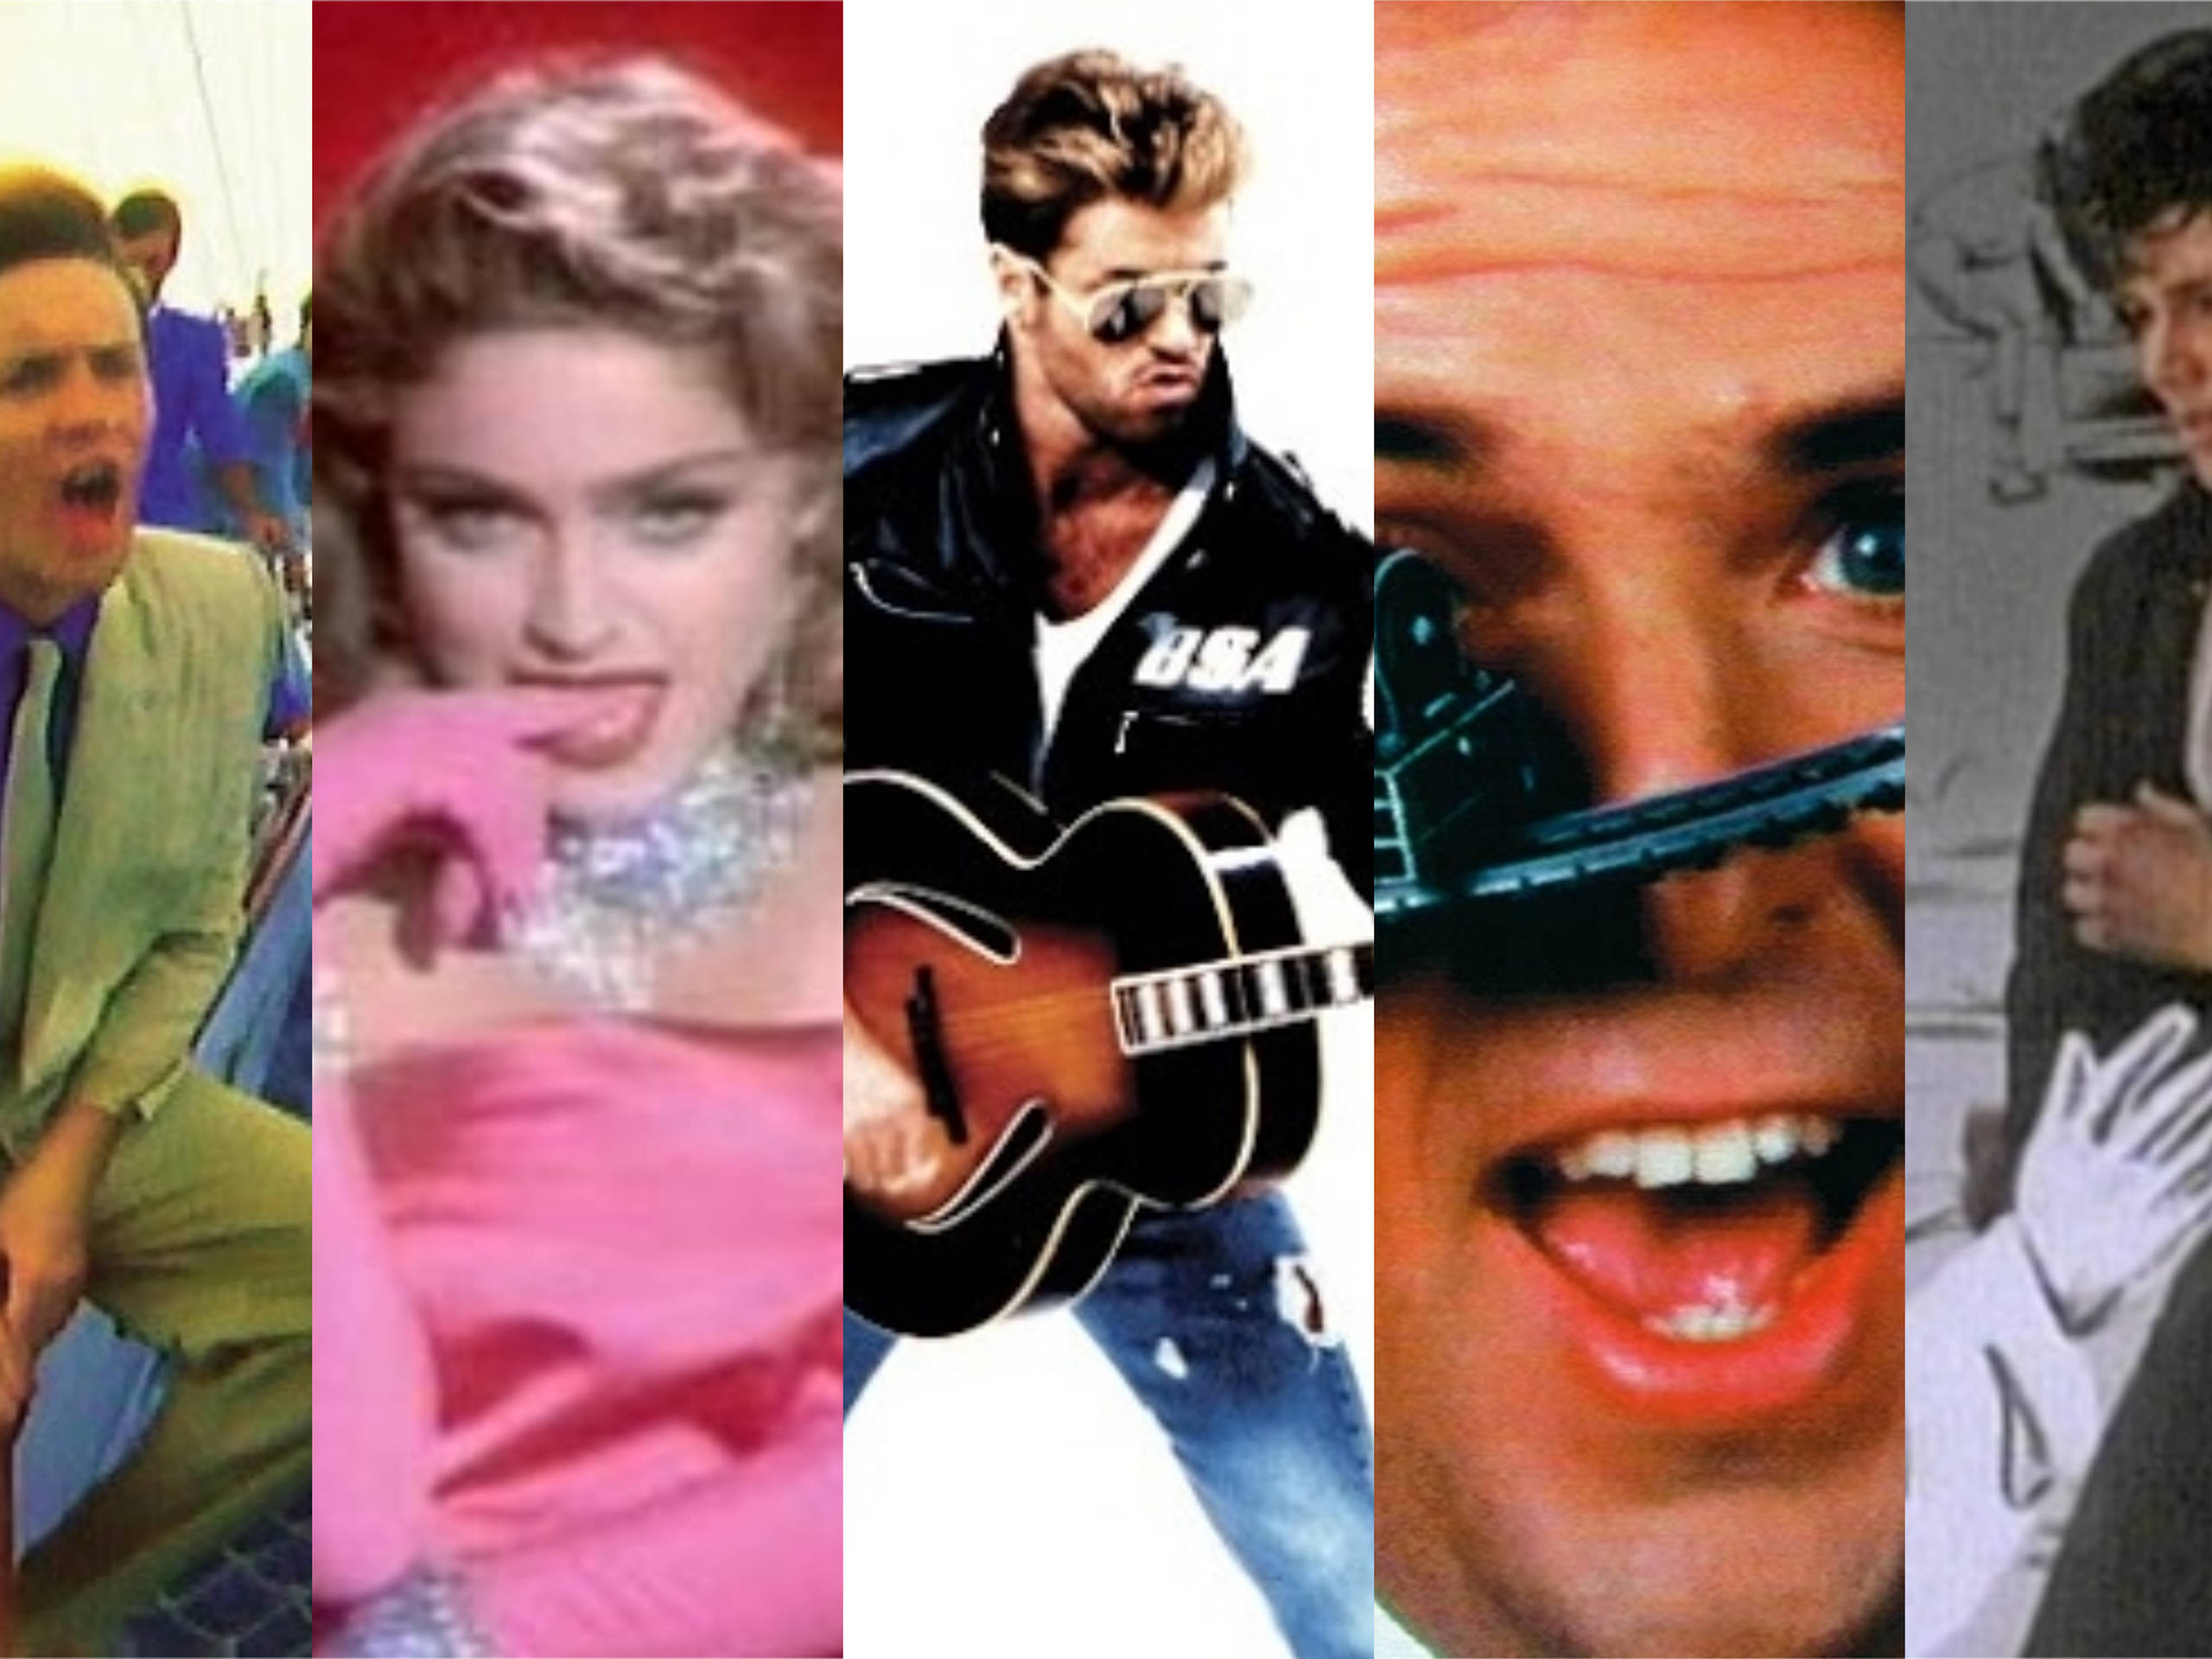 1980s videos: The 20 greatest '80s music videos, ranked - Smooth